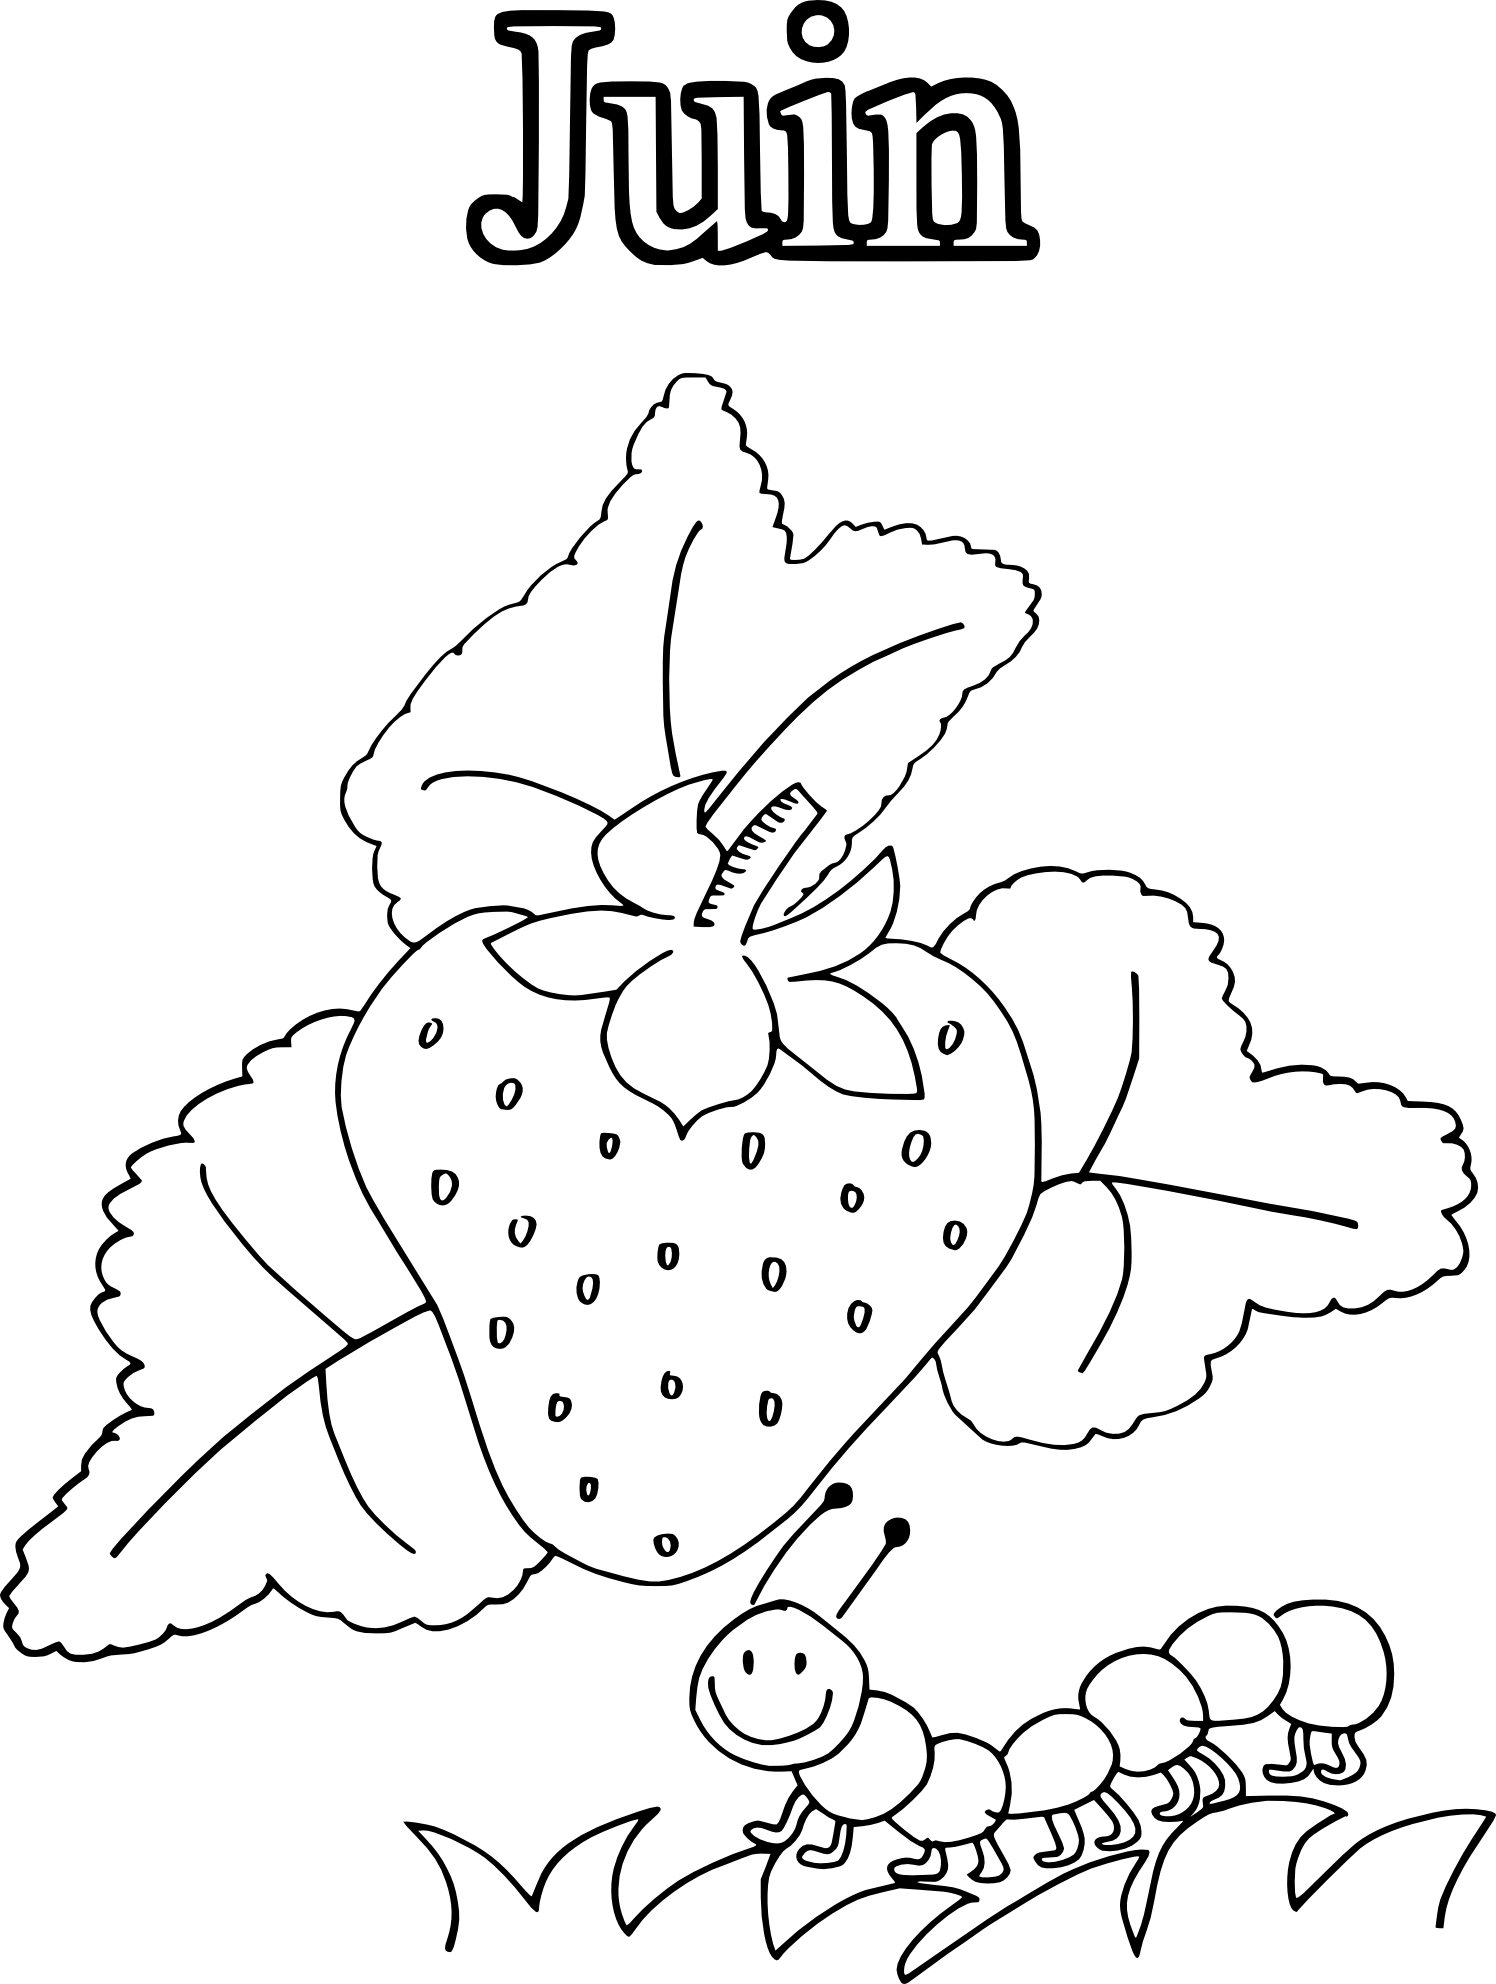 Month June coloring page